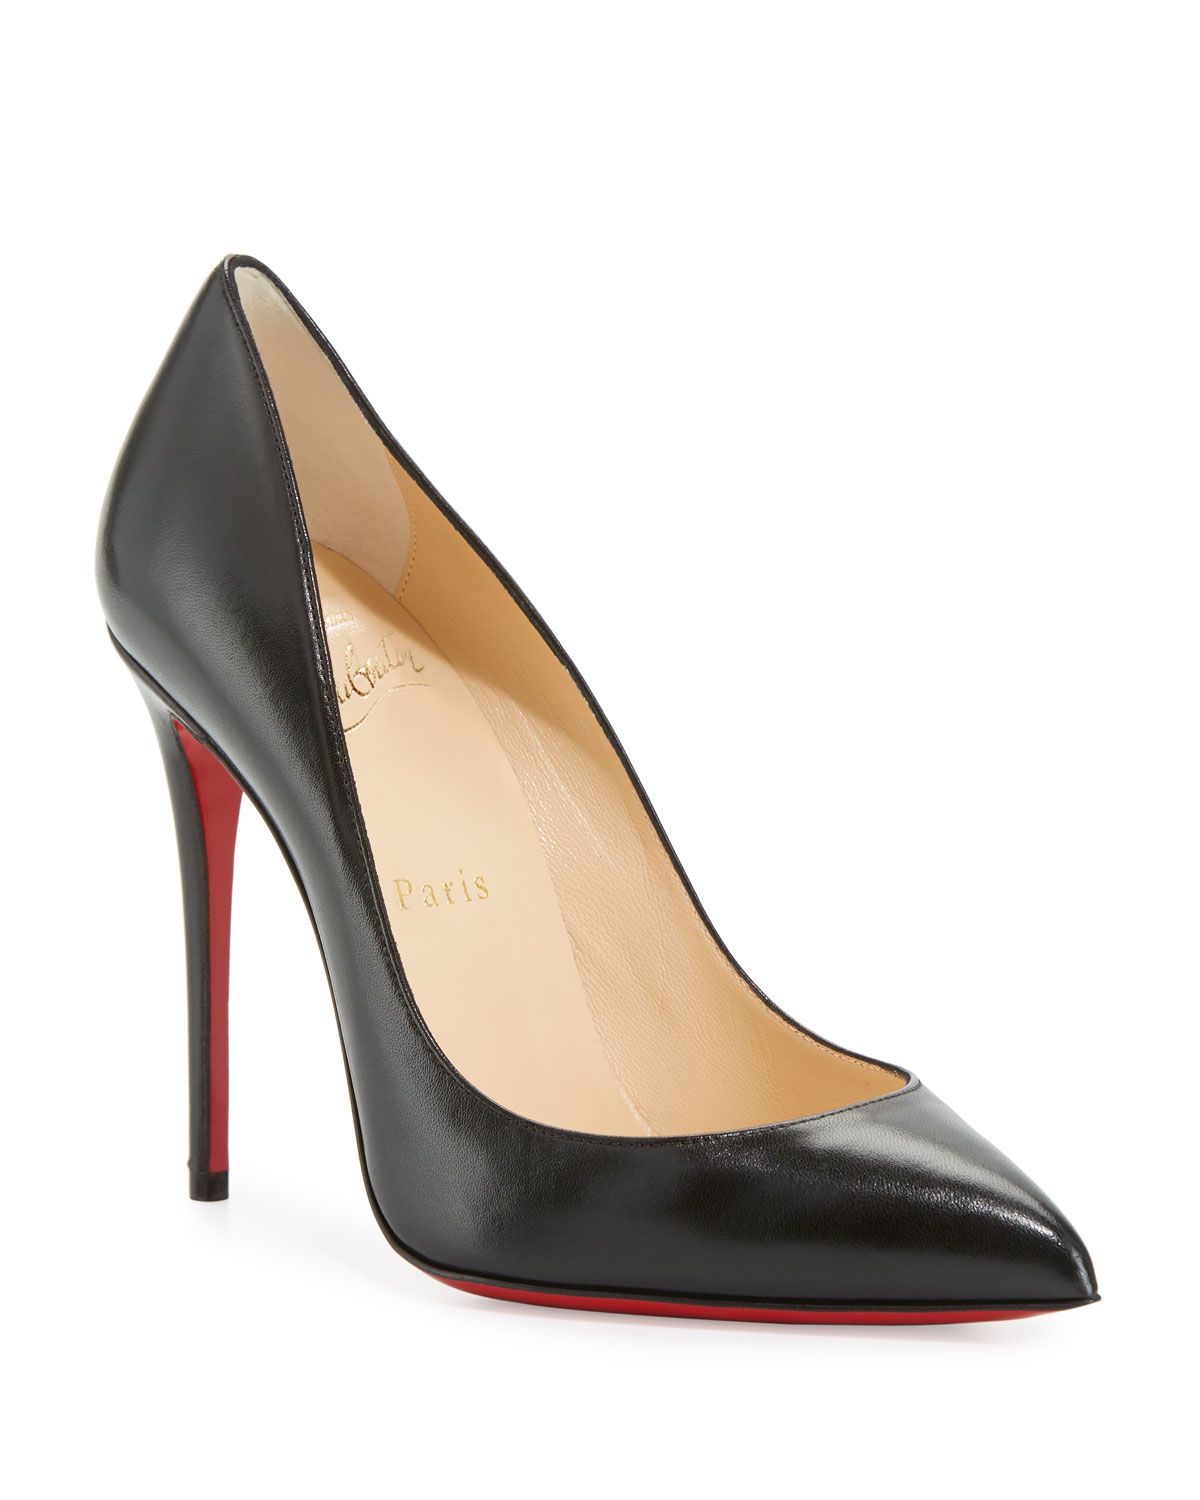 Pigalle Follies Leather 100mm Red Sole Pumps, Black | Neiman Marcus